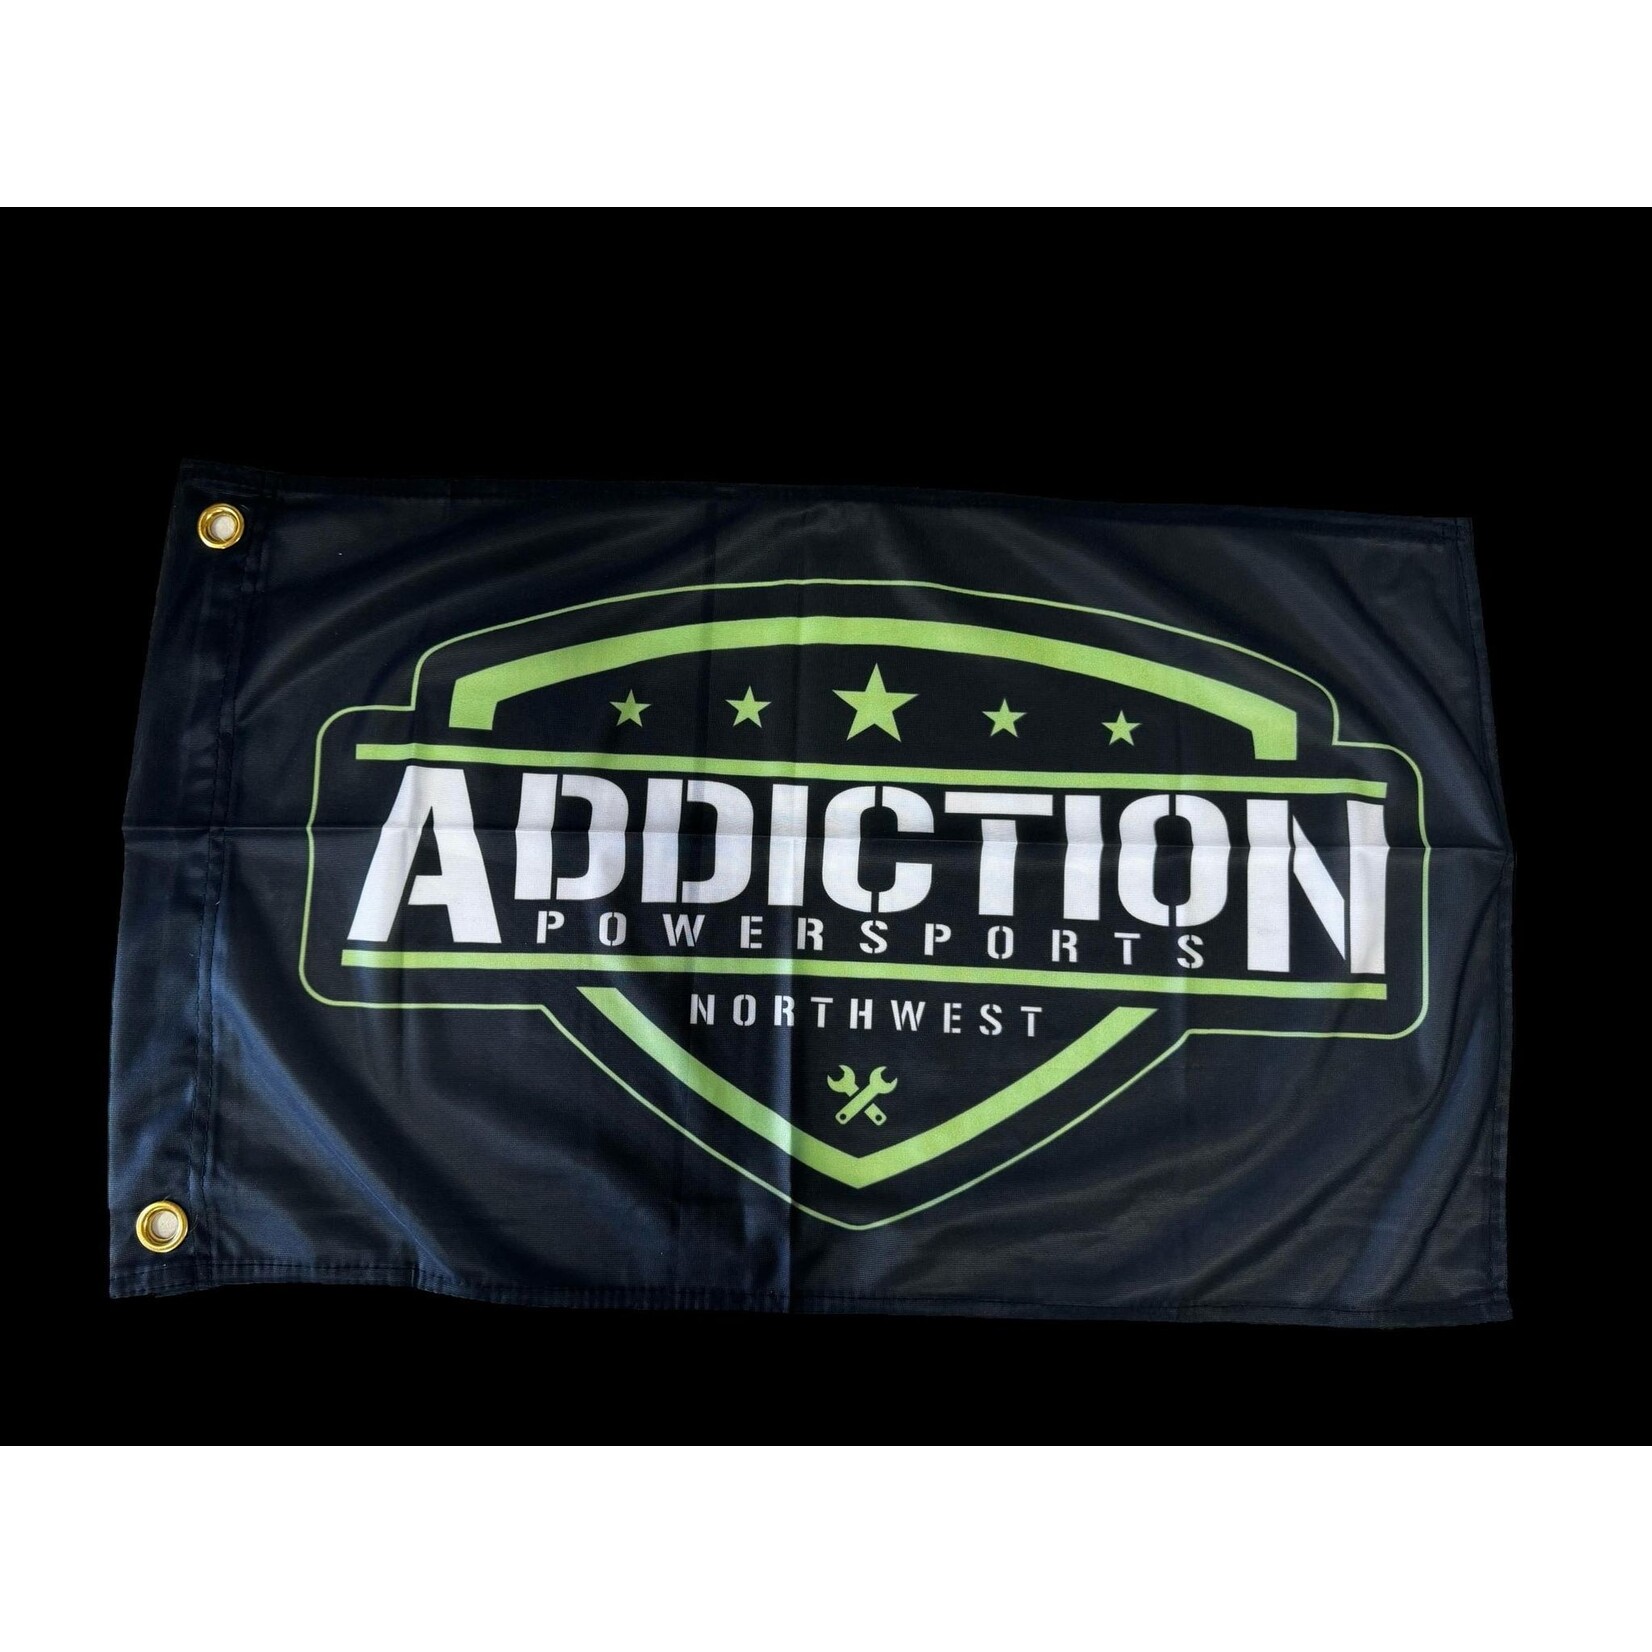 Addiction powersports NW Flags